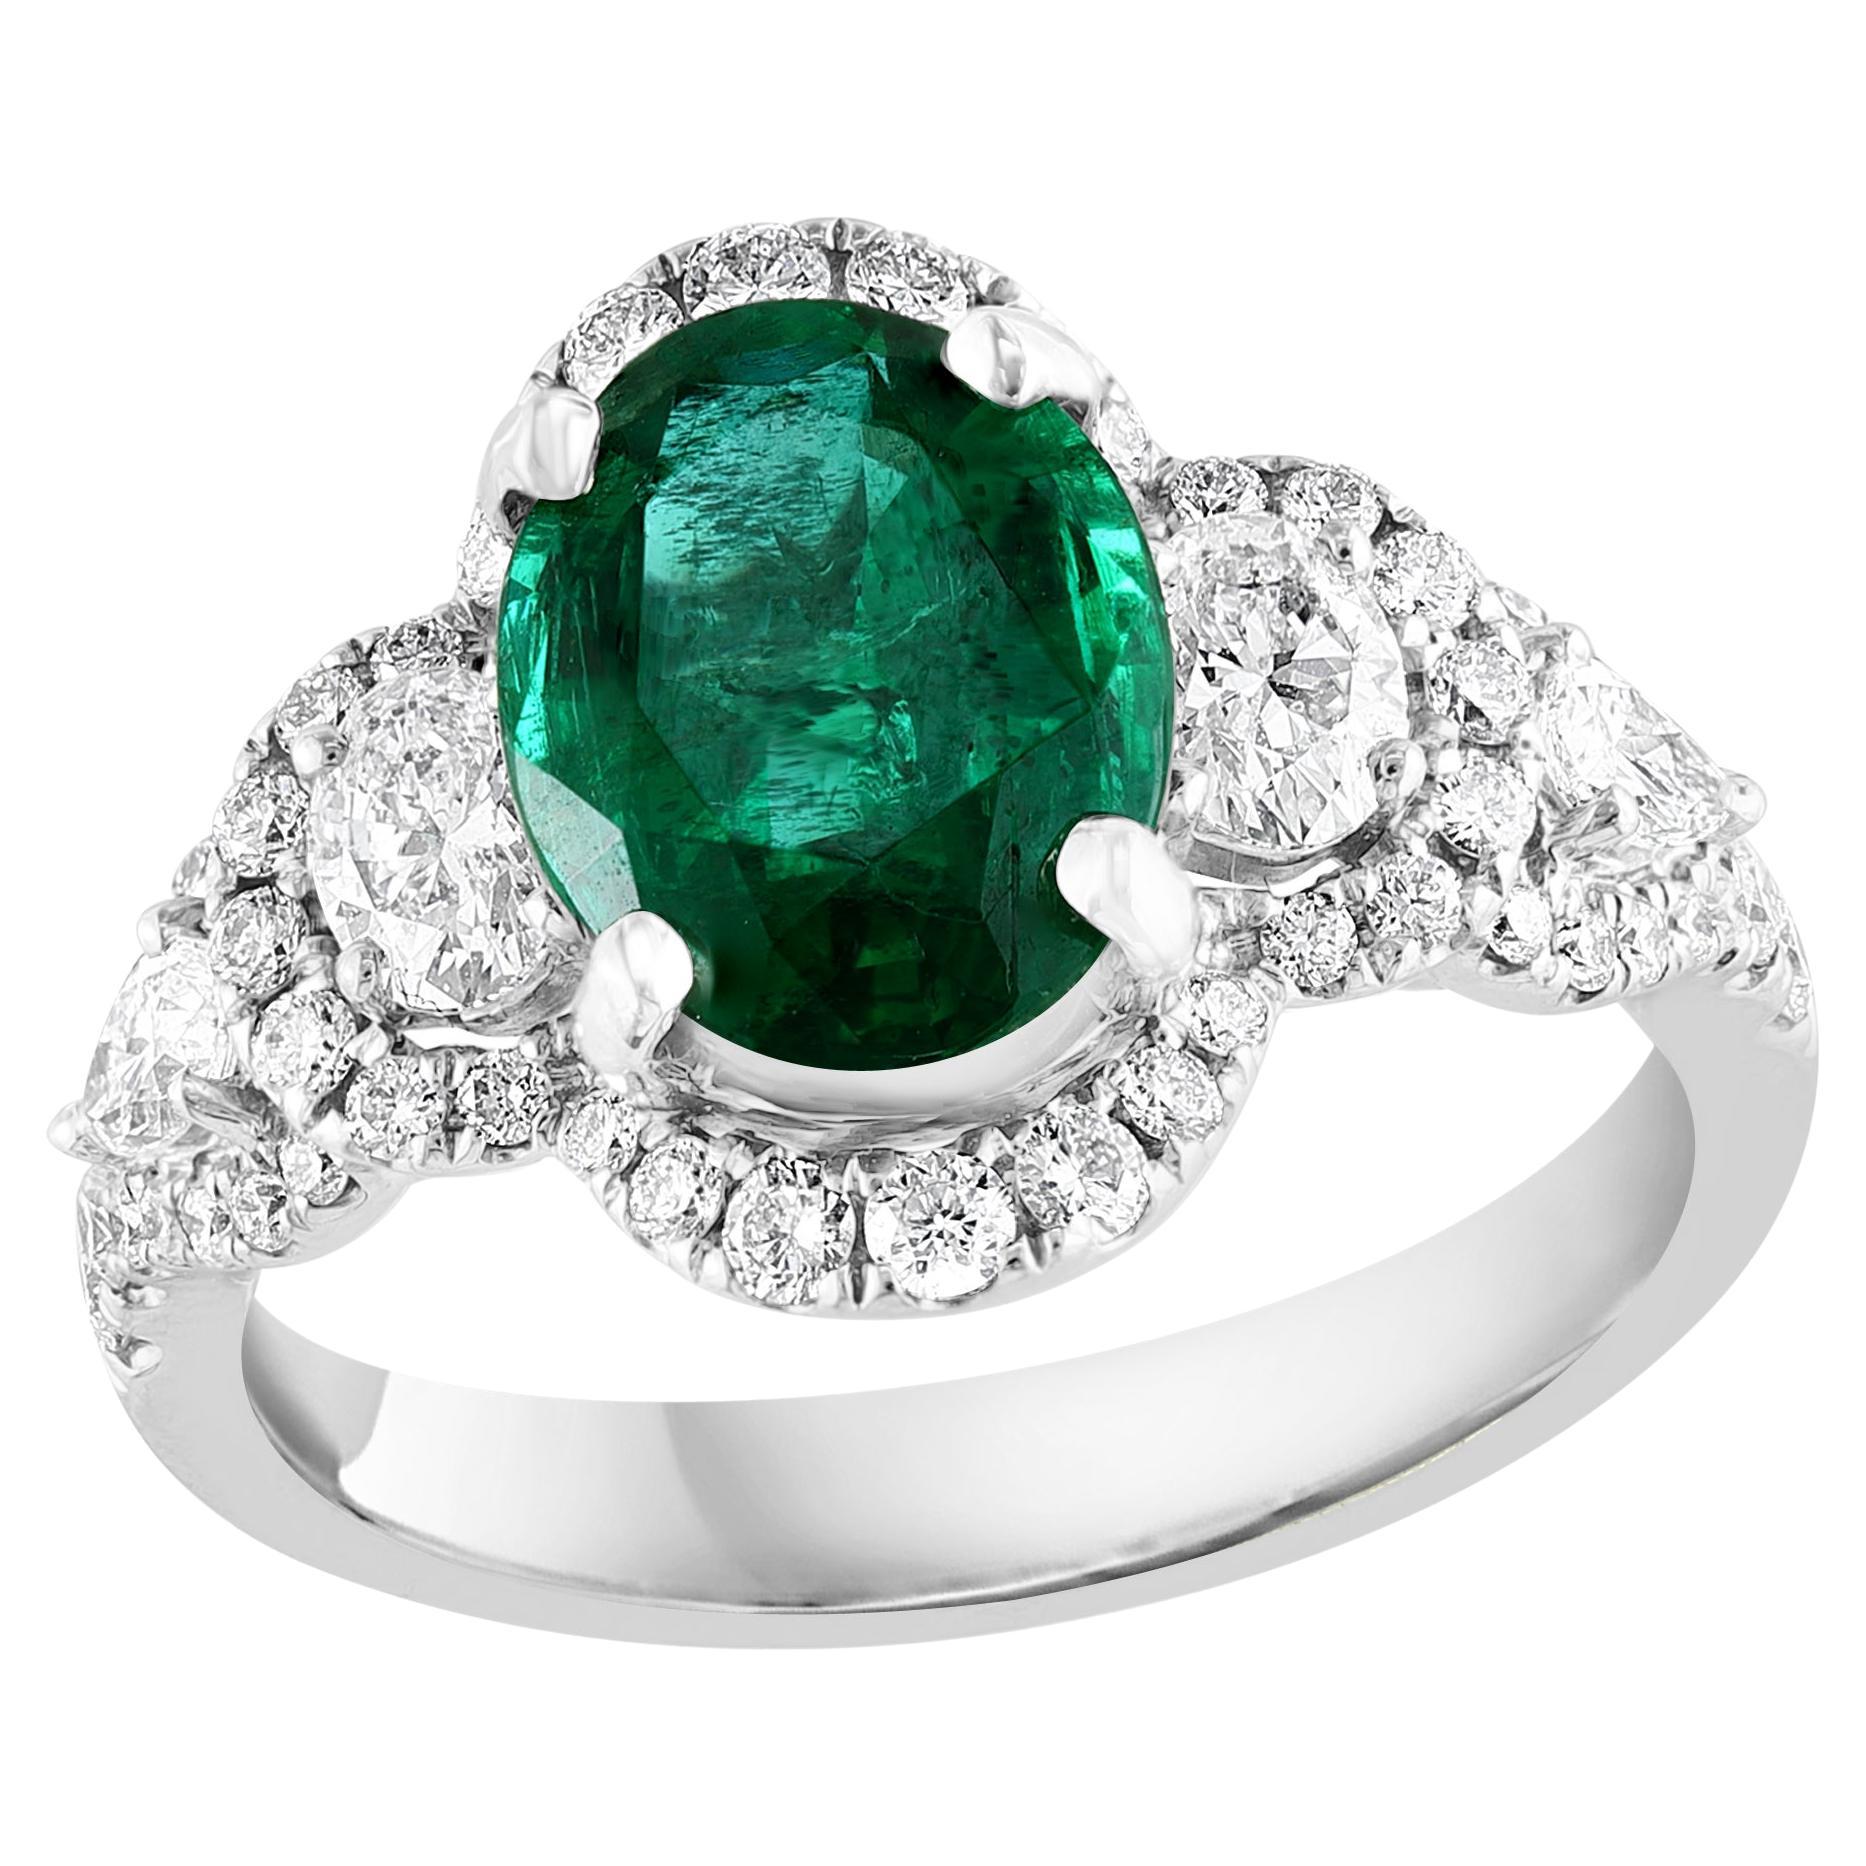 2.15 Carat Oval Cut Emerald and Diamond Halo Ring in 18K White Gold